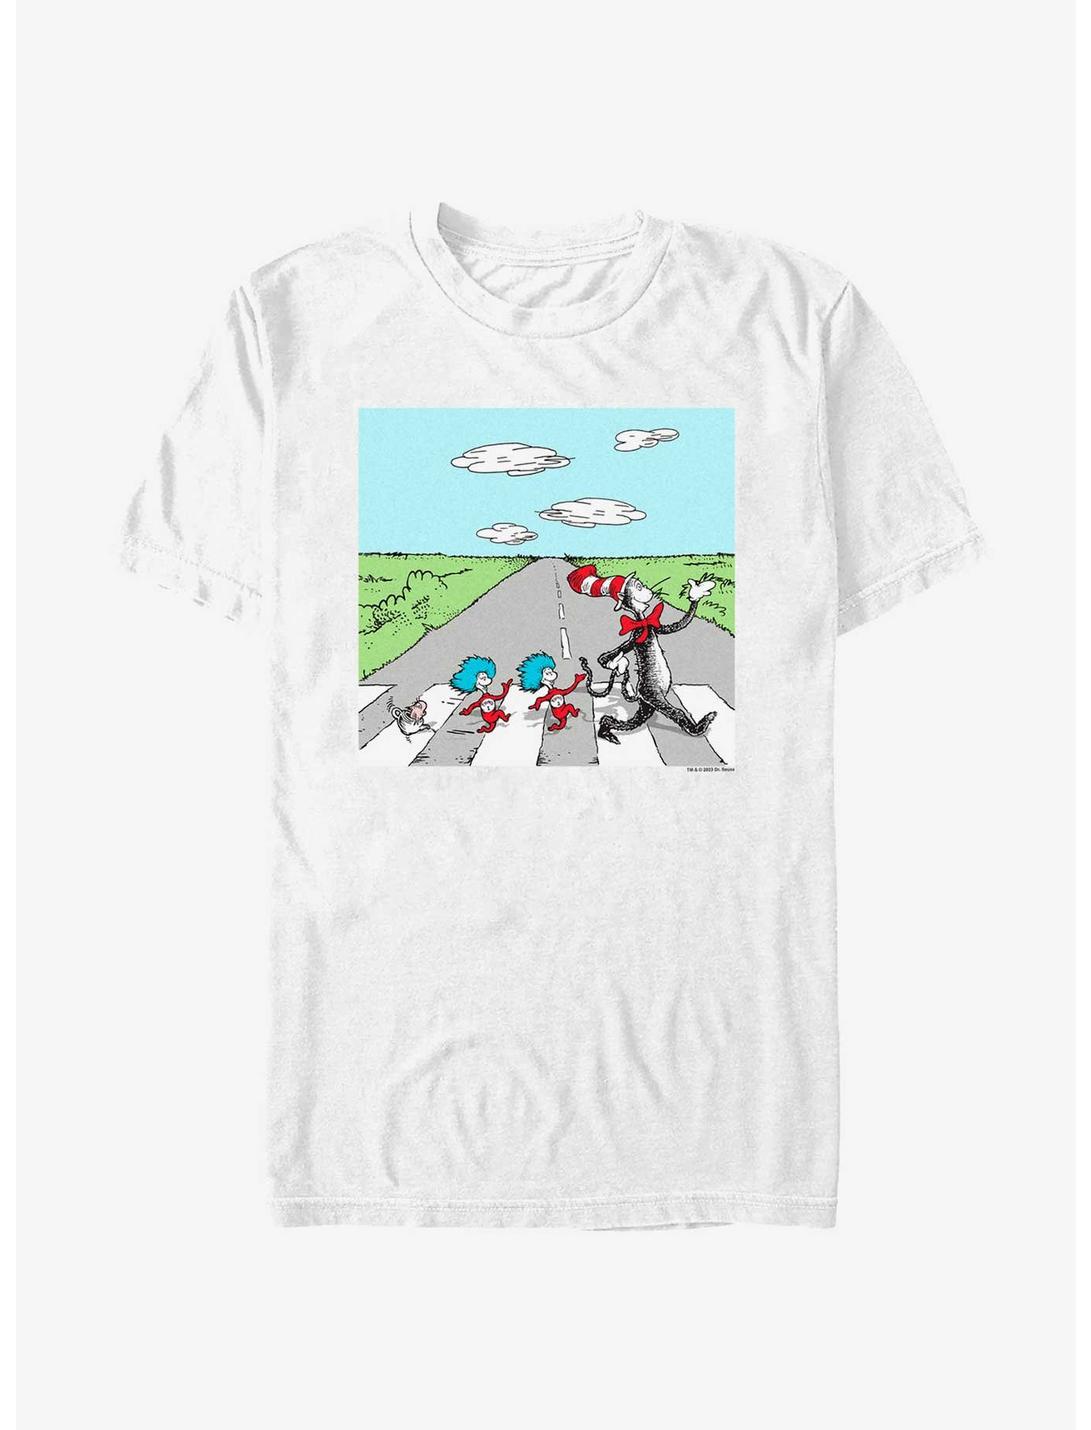 Dr. Seuss Cat In The Hat and Things Crossing T-Shirt, WHITE, hi-res